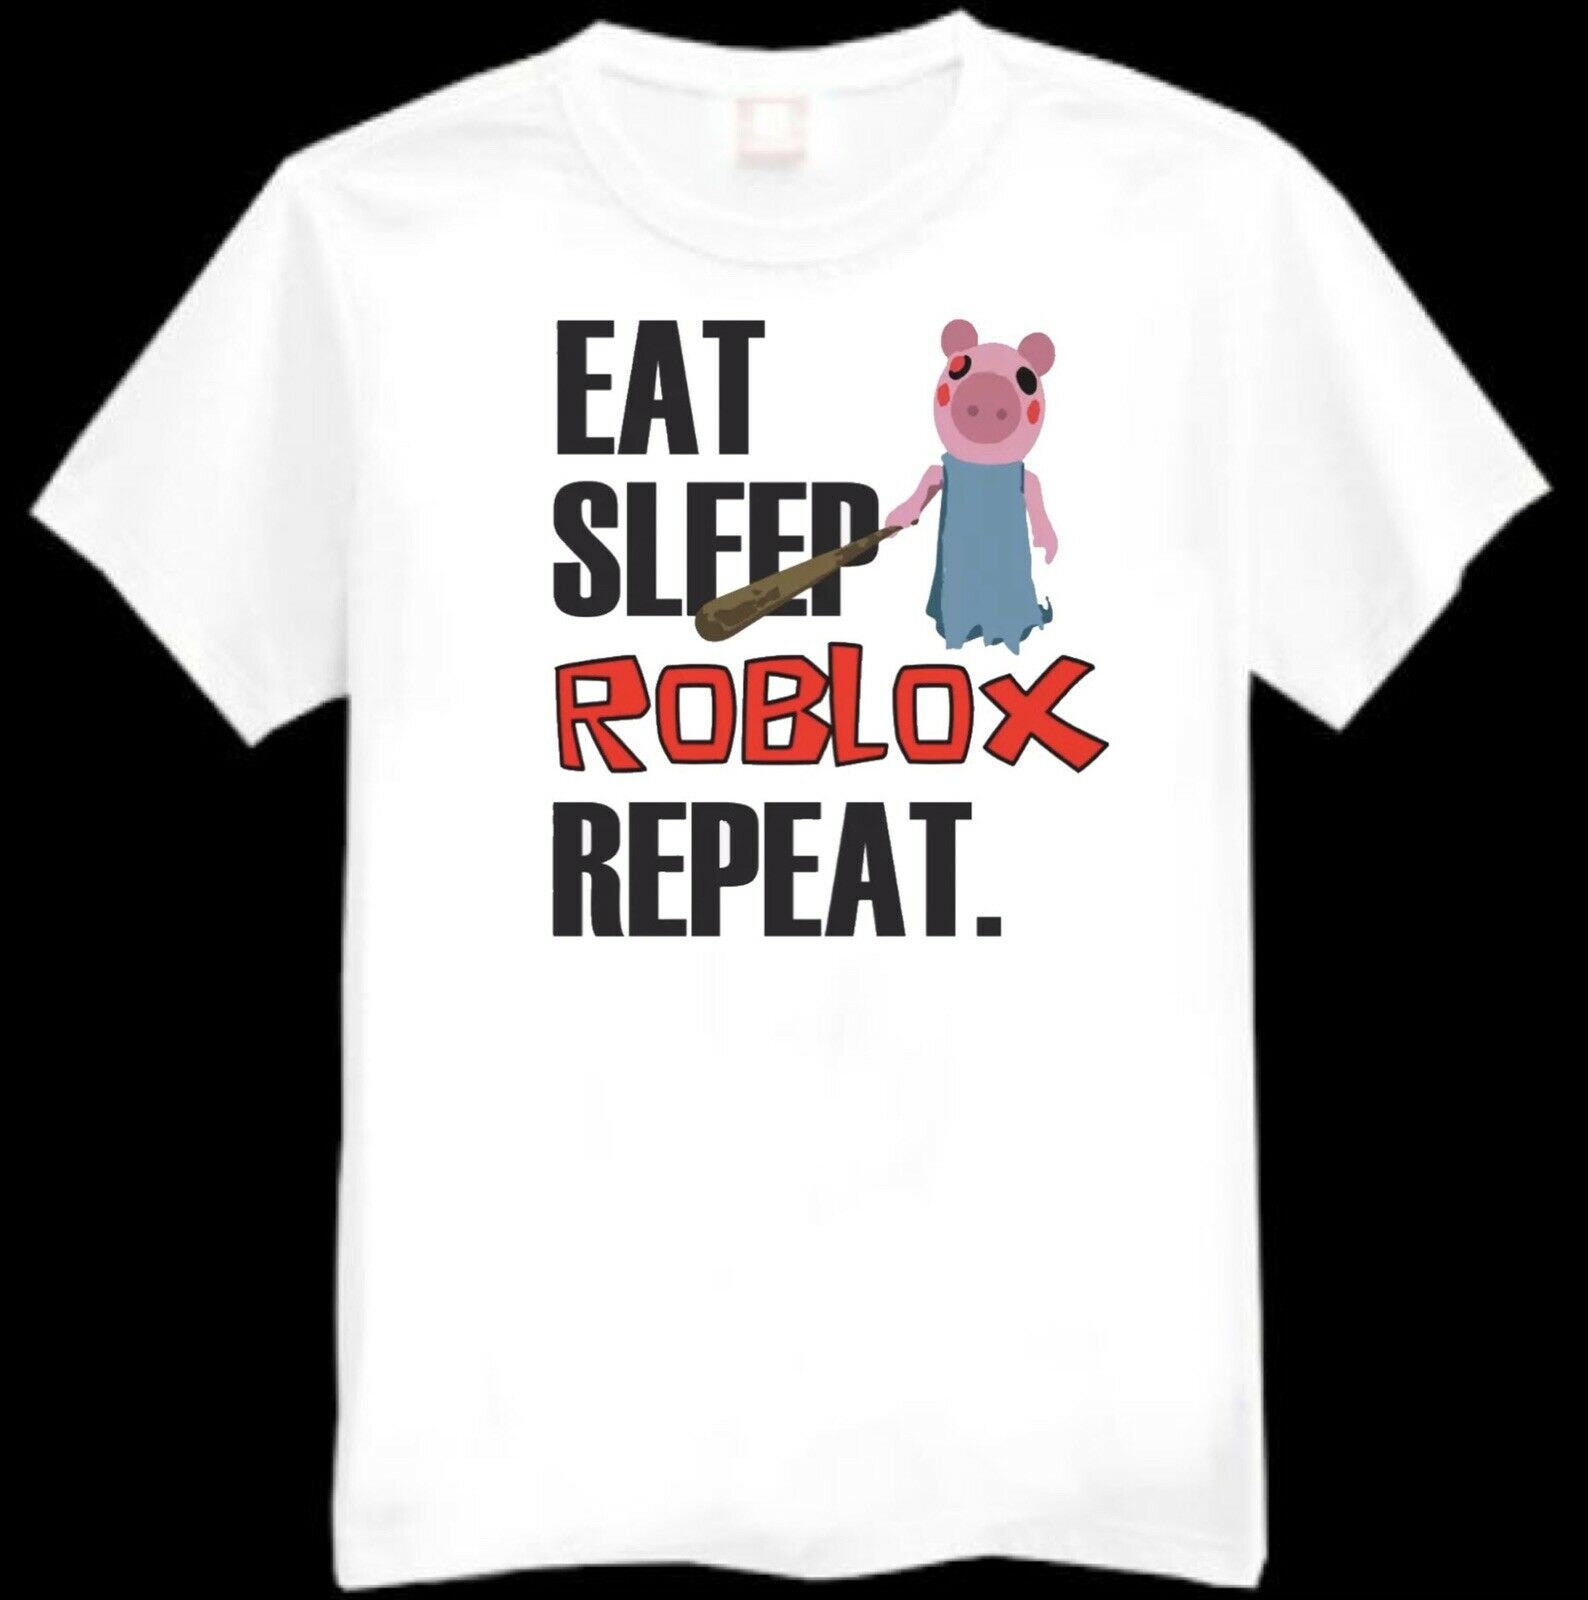 Roblox Girl Characters Kids Printed T-Shirt Various Sizes Available